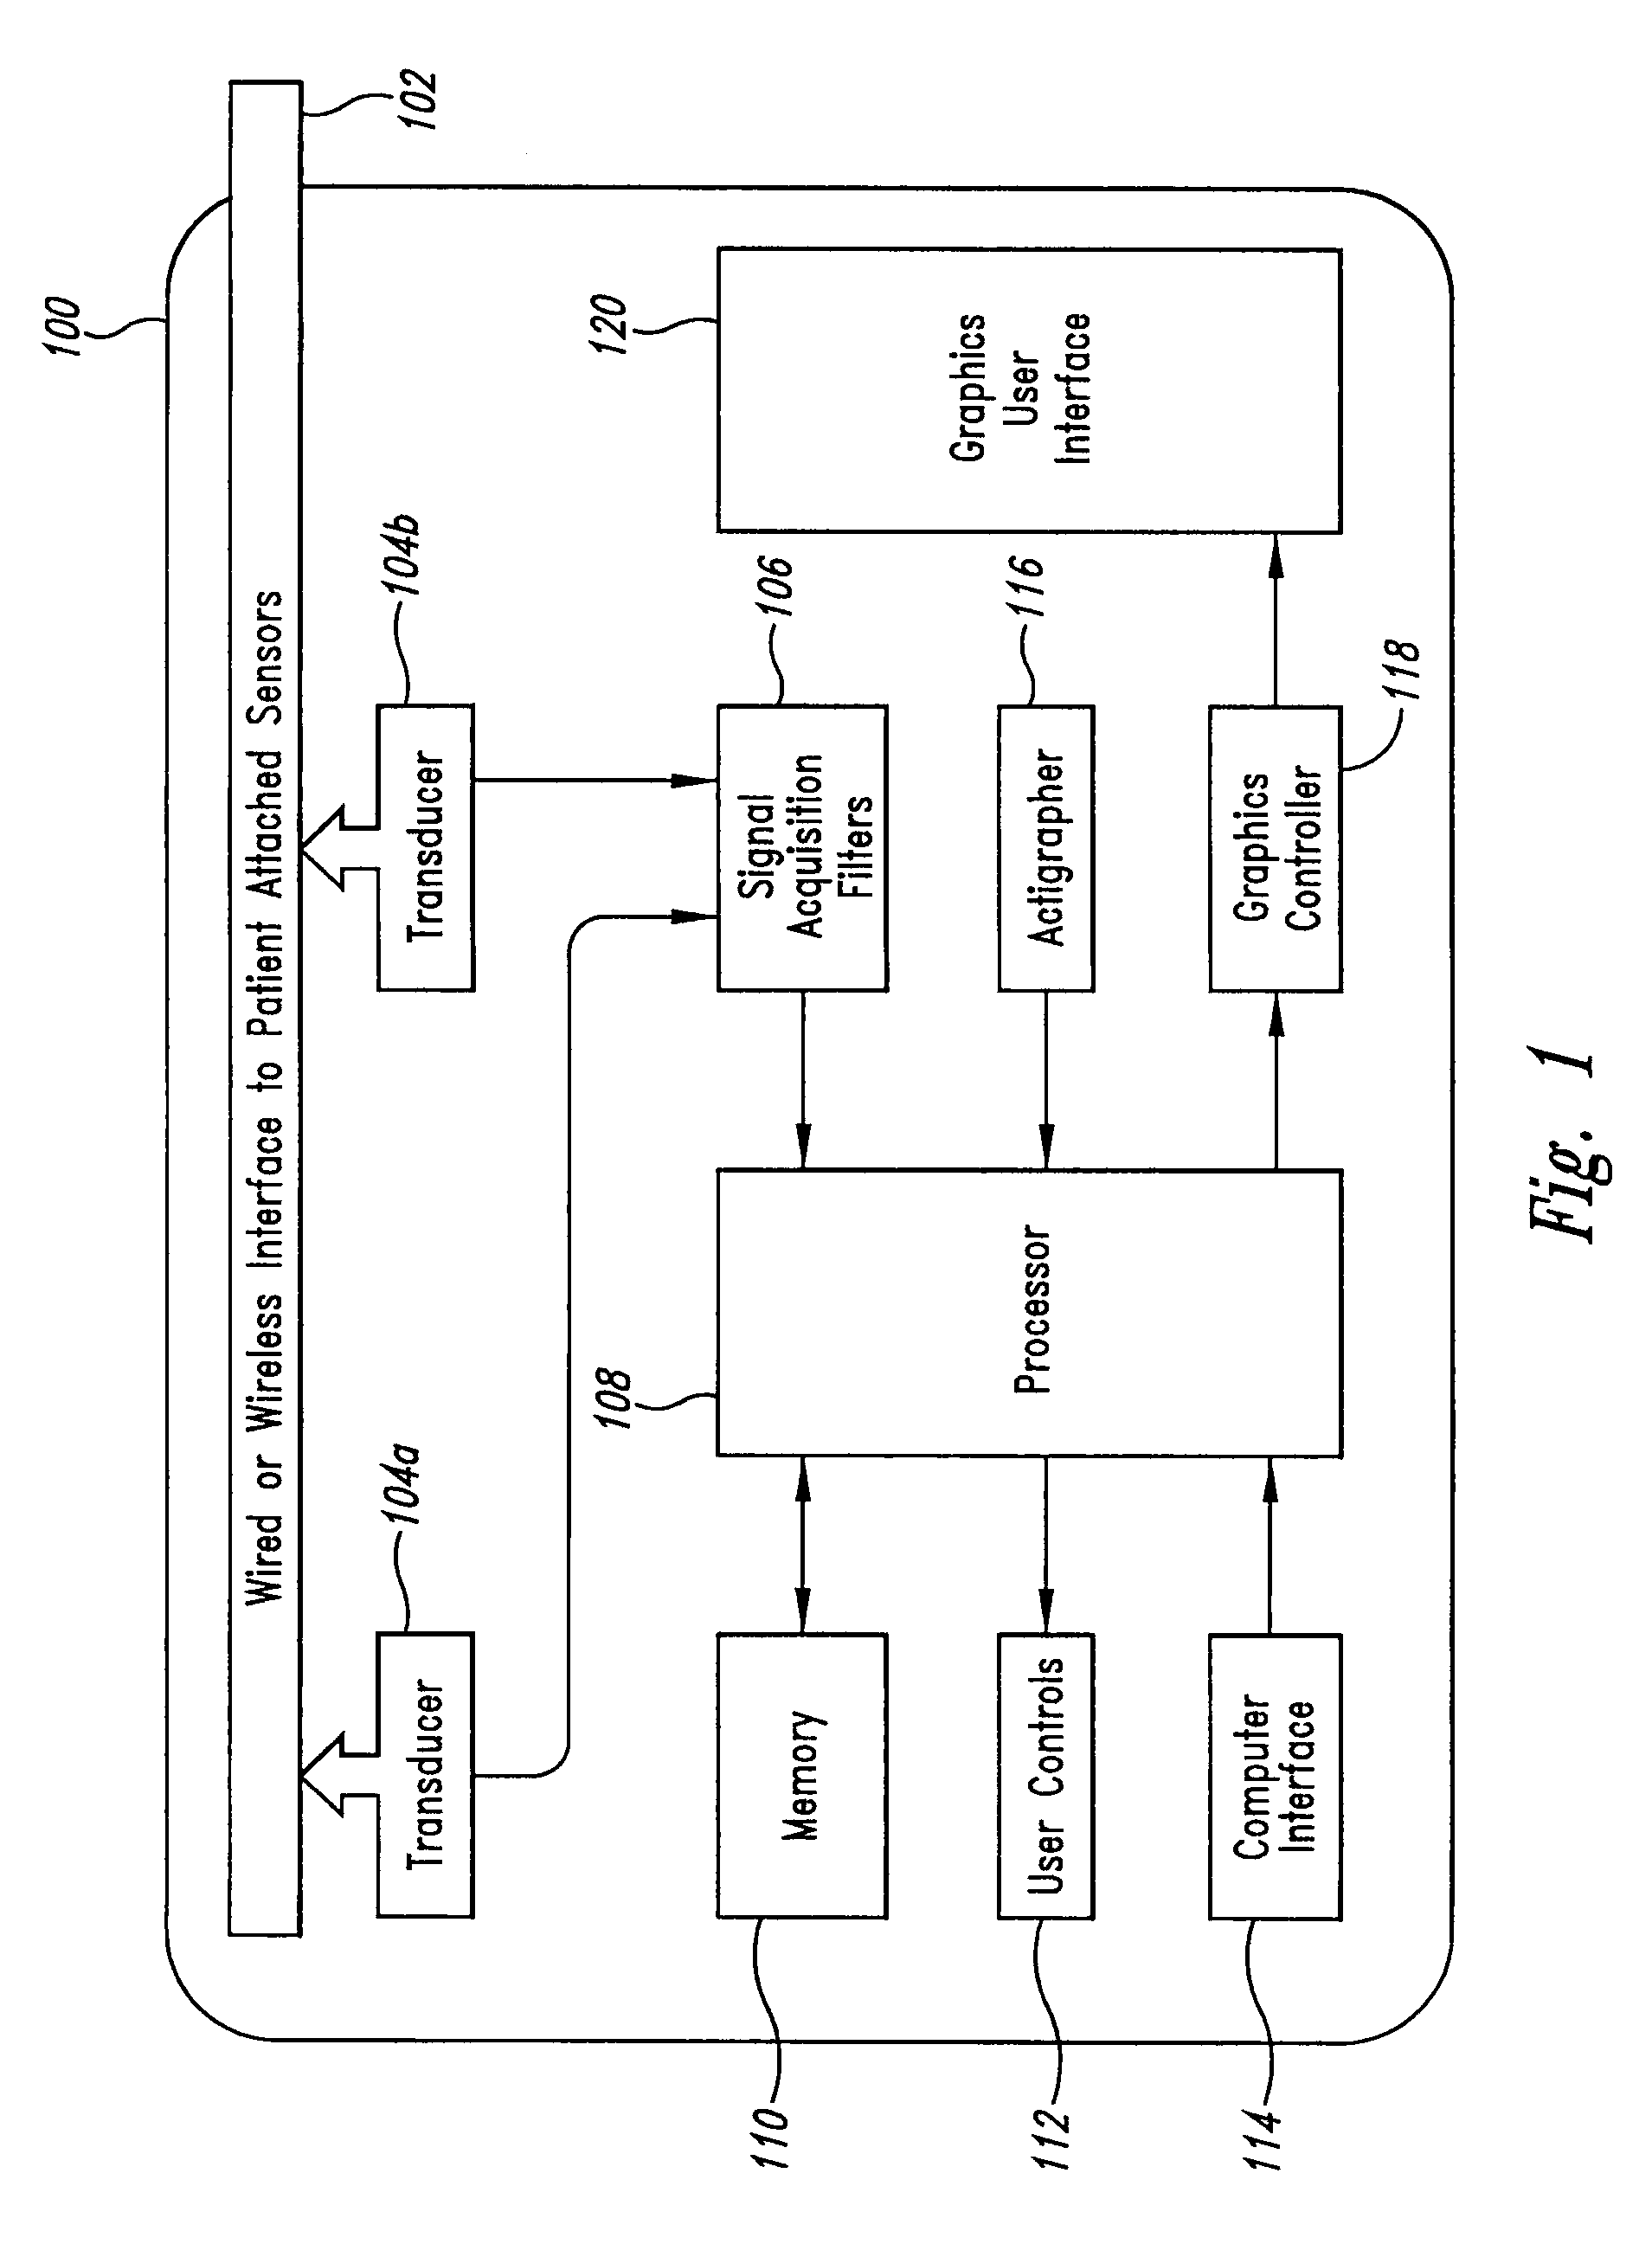 Ambulatory patient monitoring apparatus, system and method